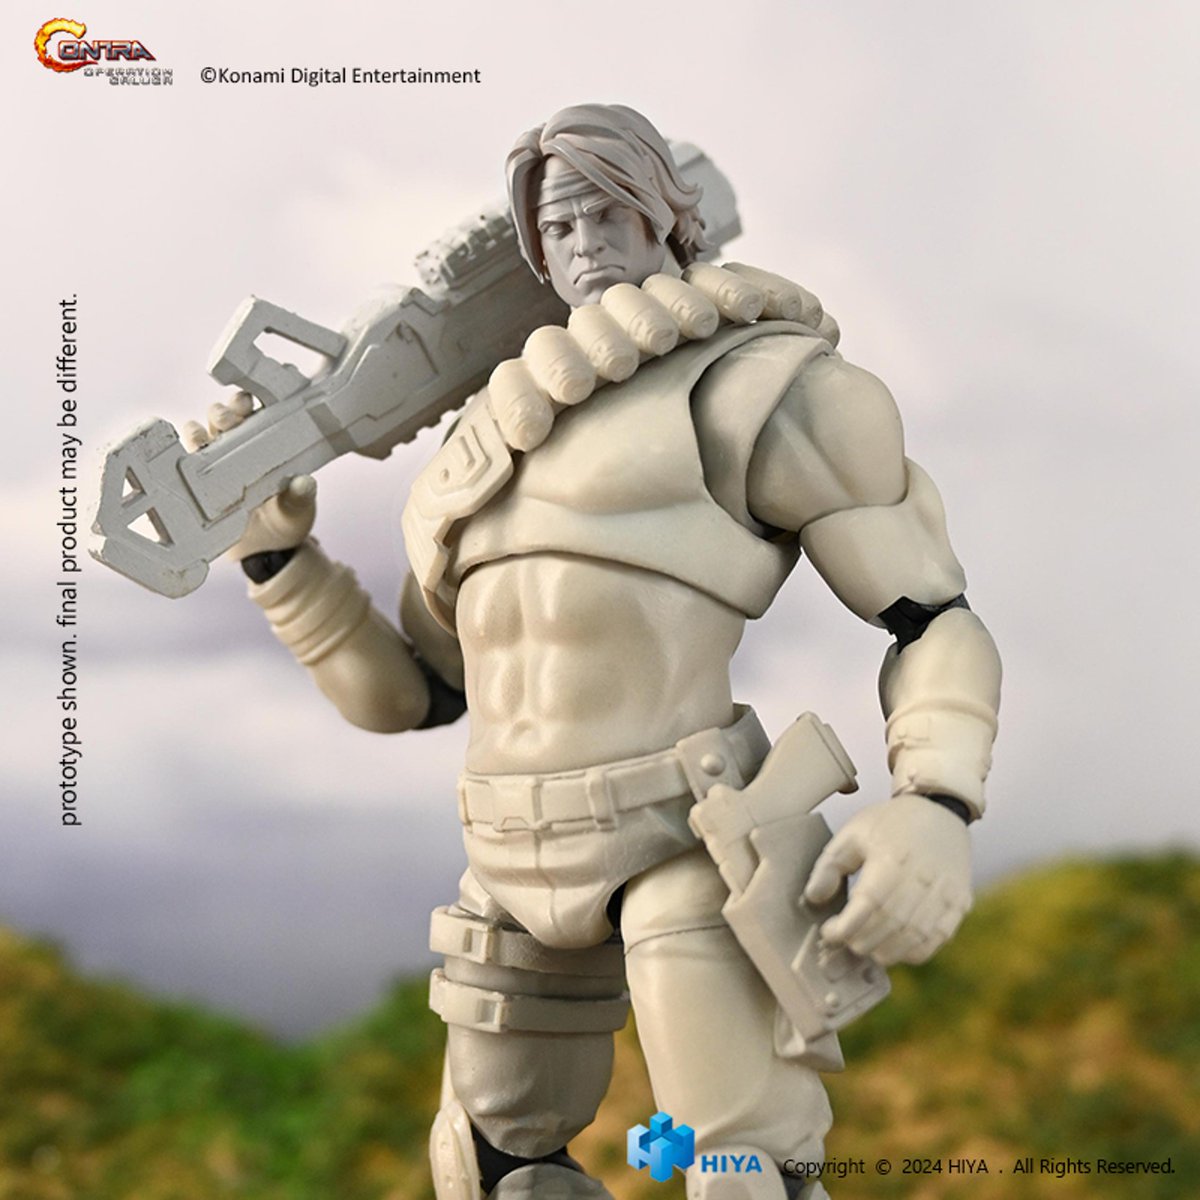 First prototypes of Hiya Toys’ 'Contra: Operation Galuga' action figures have been revealed! #hiyatoys #ContraOG Pre-orders coming soon! Stay tuned for more updates by following us! *The prototypes are in the development stage and the final products may vary